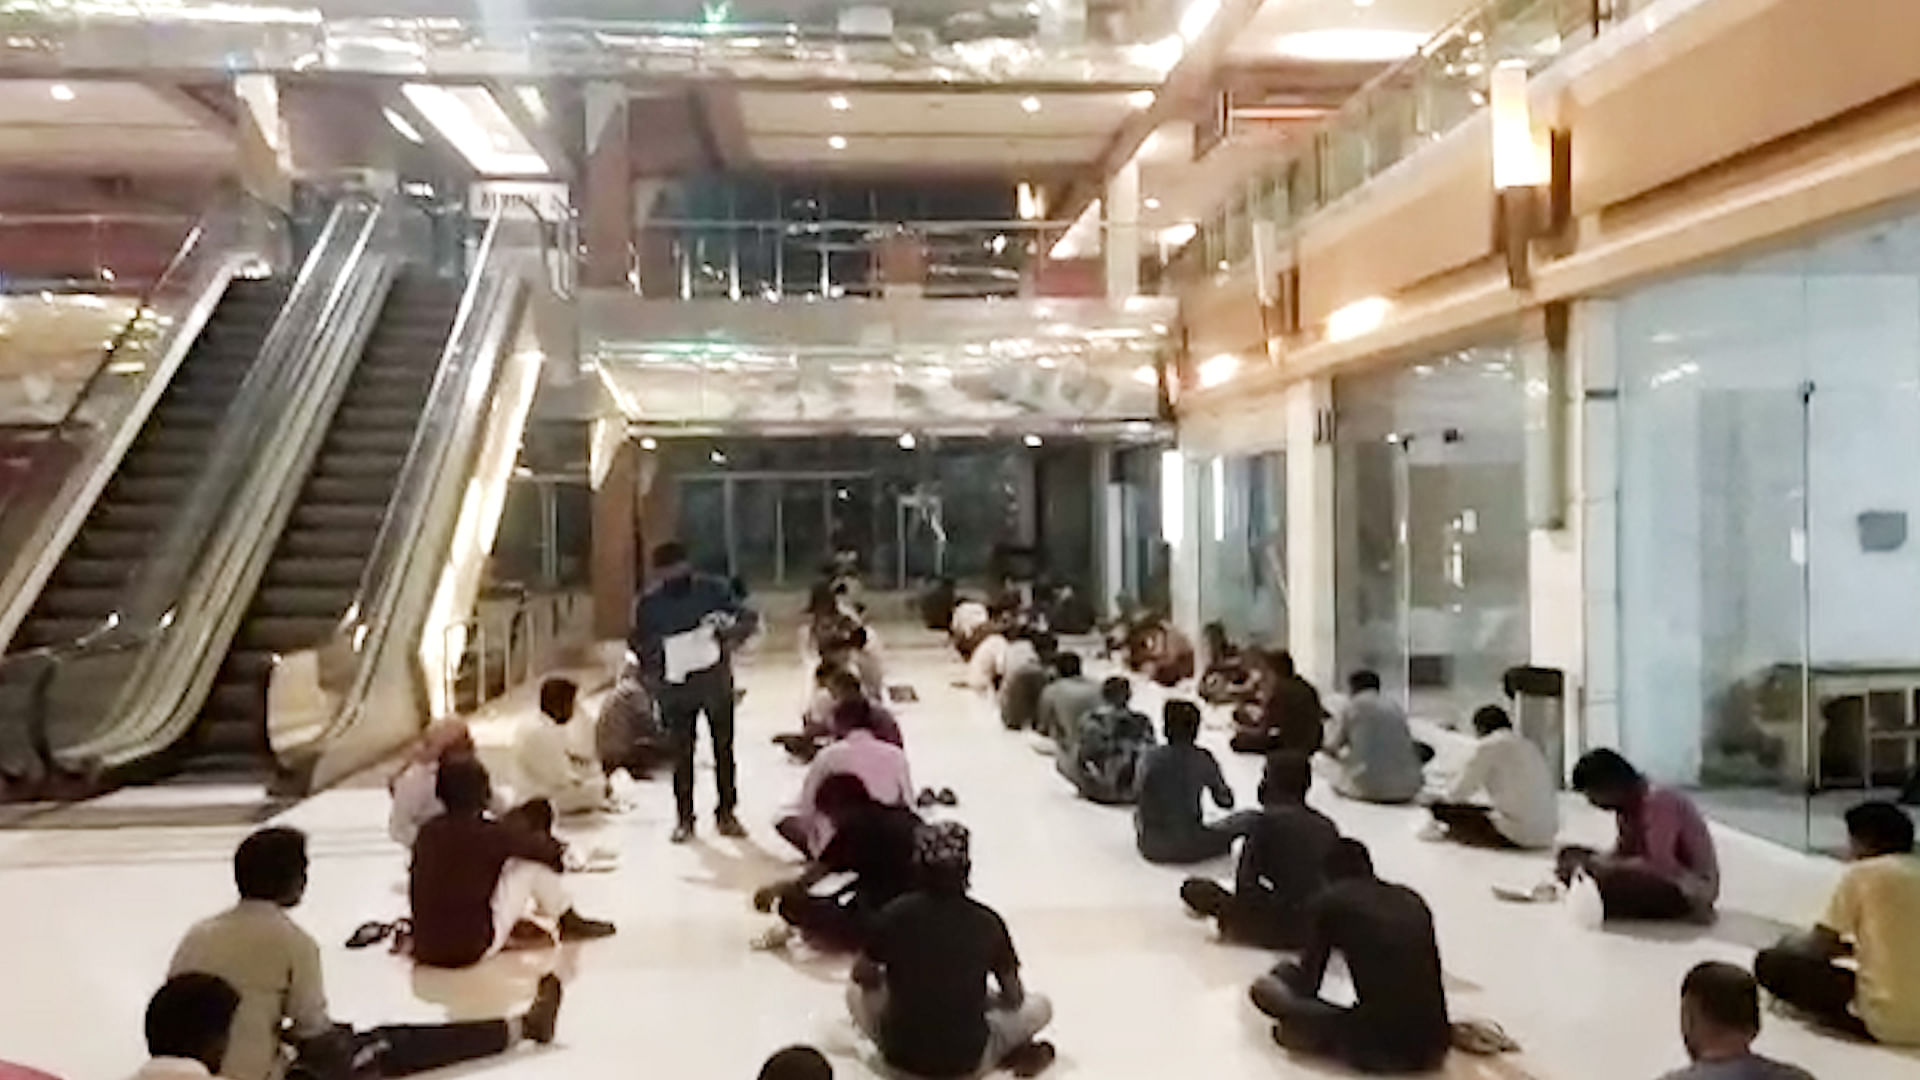 Migrants given shelter in Ahmedabad mall